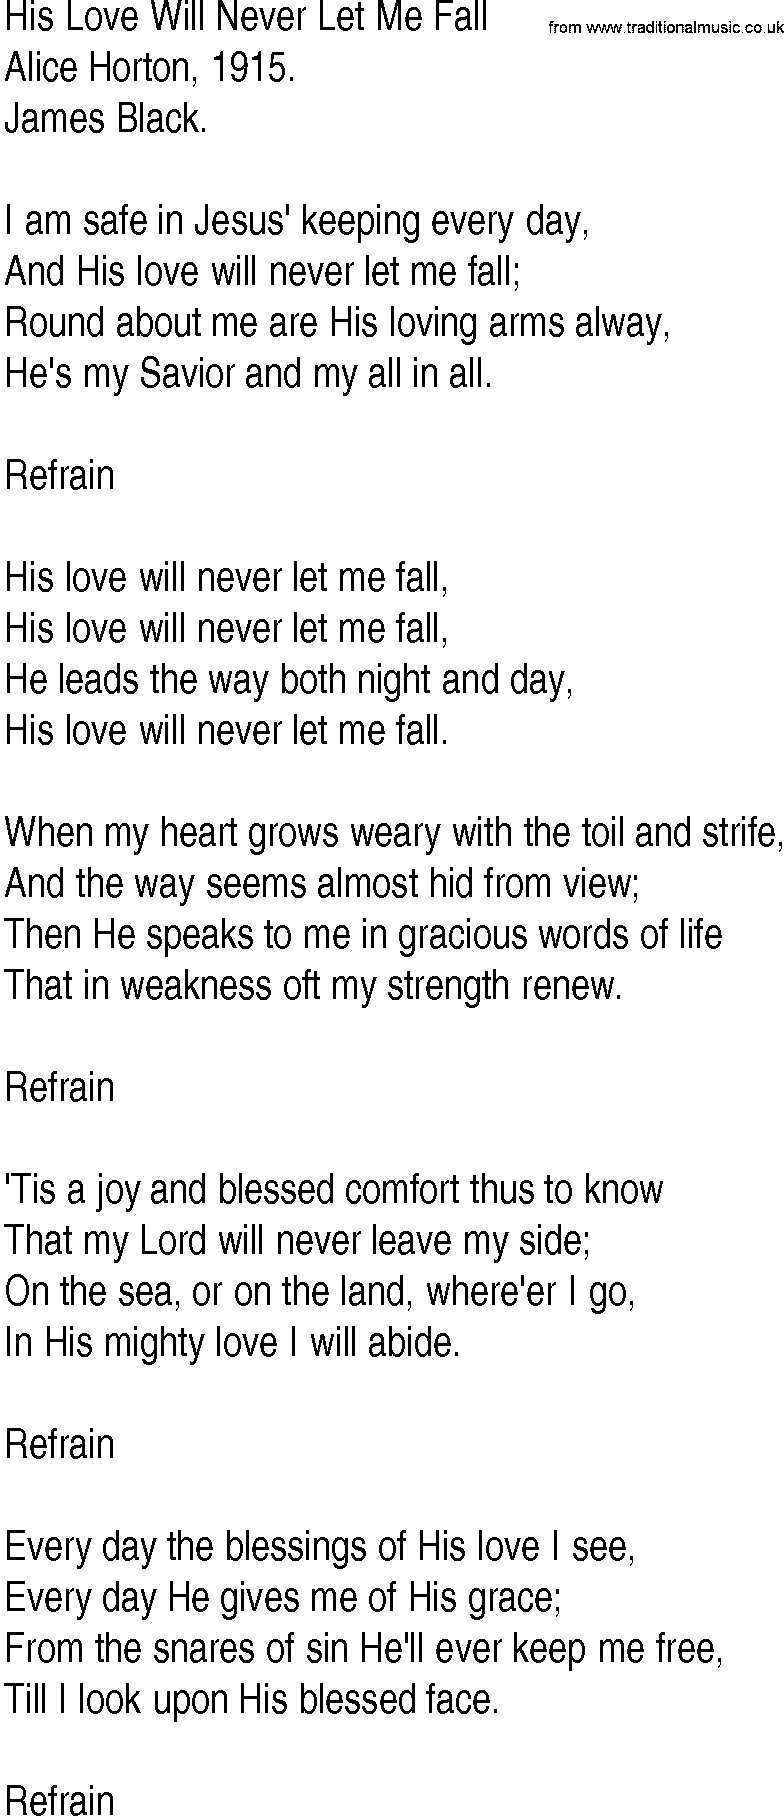 Hymn and Gospel Song: His Love Will Never Let Me Fall by Alice Horton lyrics